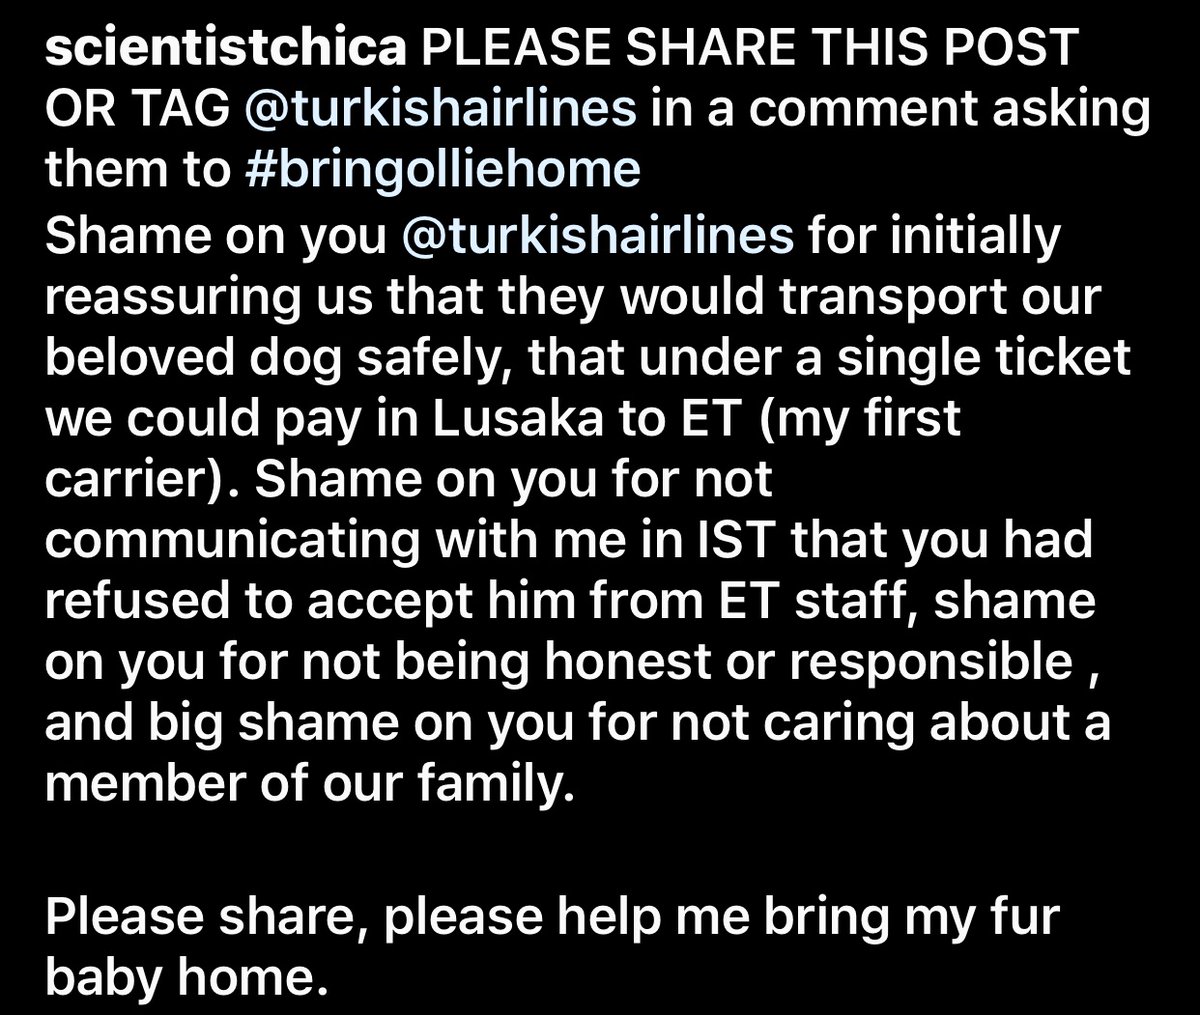 URGENT ANIMAL WELFARE: 
@TurkishAirlines
 has detained a passengers beloved pet and given her no communication about when they will reunite them. We are very worried for Ollie’s safety and well being.  Please retweet for @ssiyer8 
#bringolliehome
#turkishairlines
#animalemergency